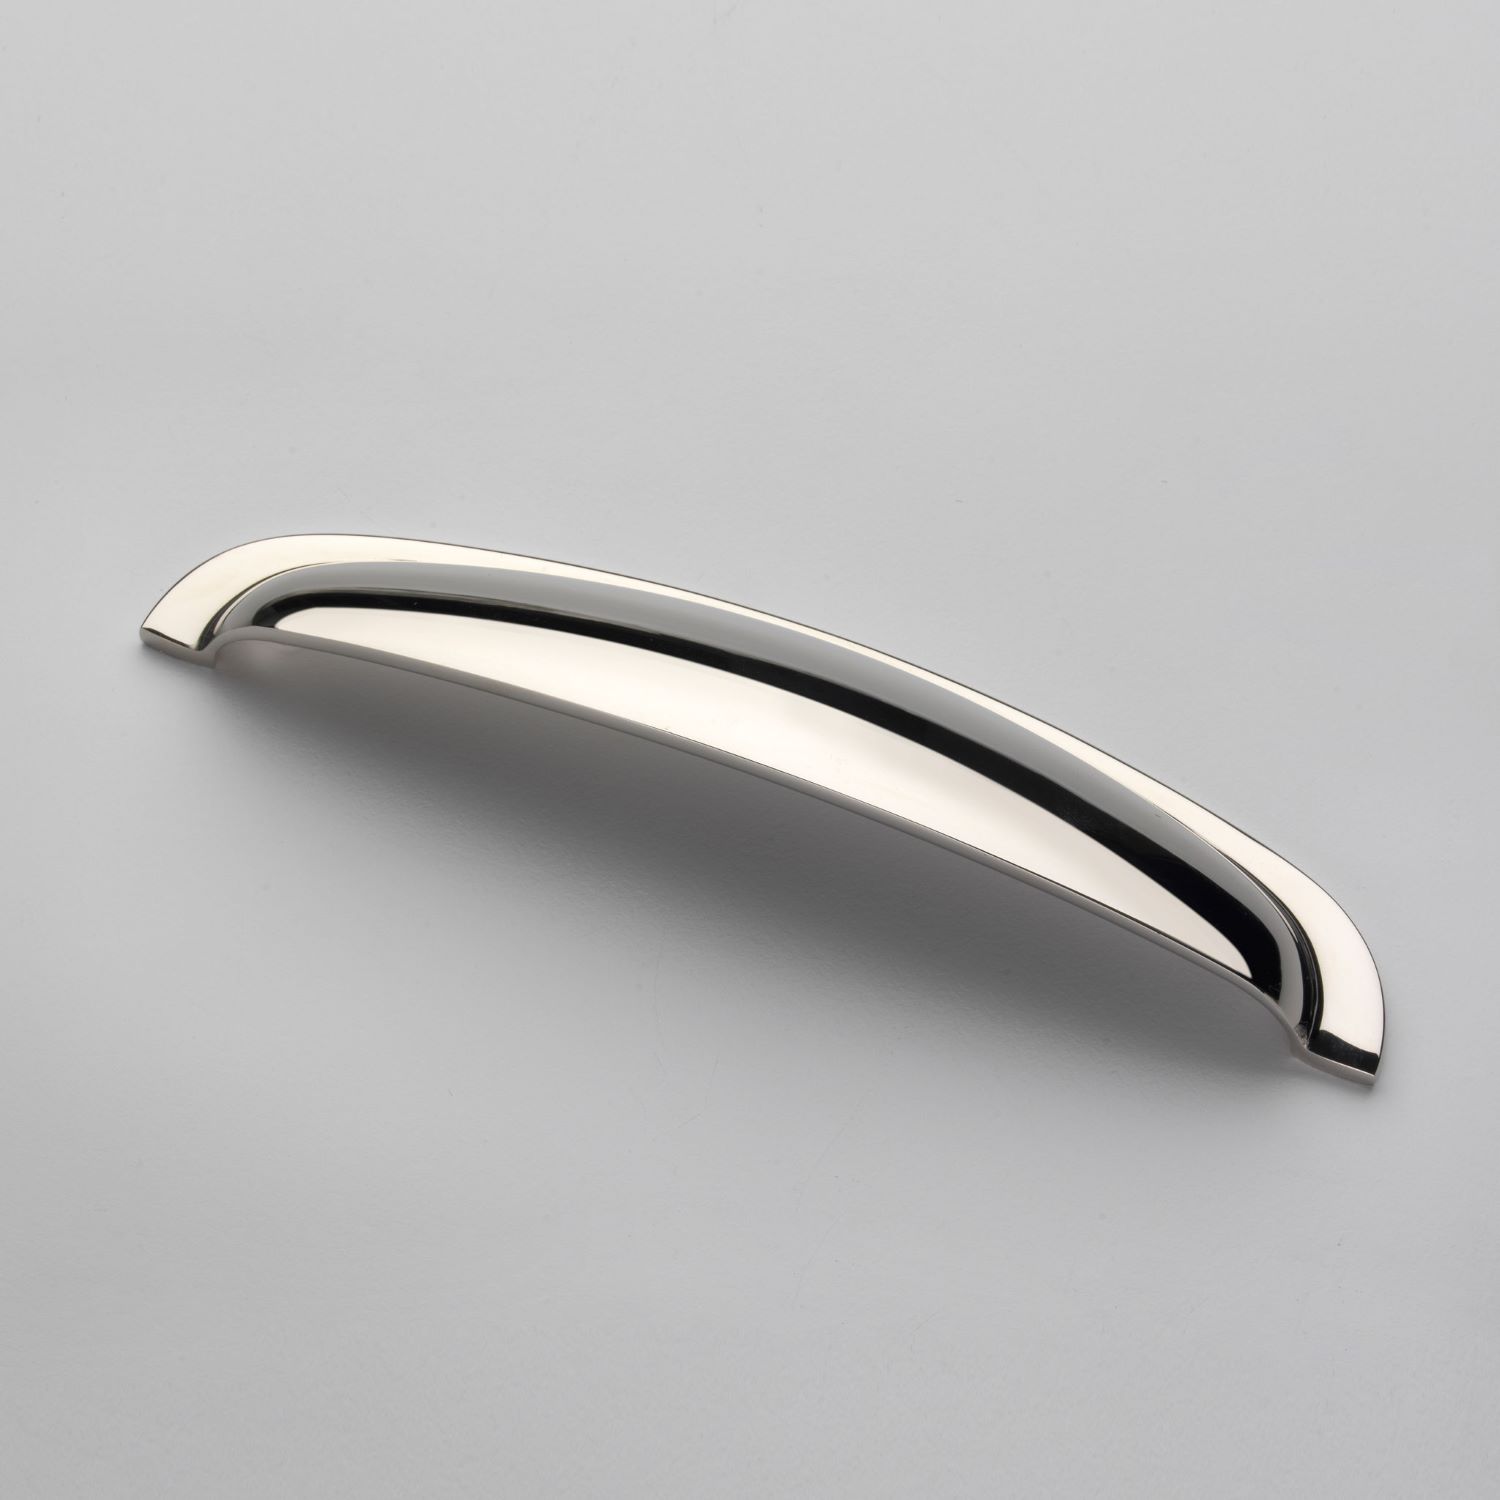 The Chelsea cabinet handle range from Crofts & Assinder's Special Works Collection